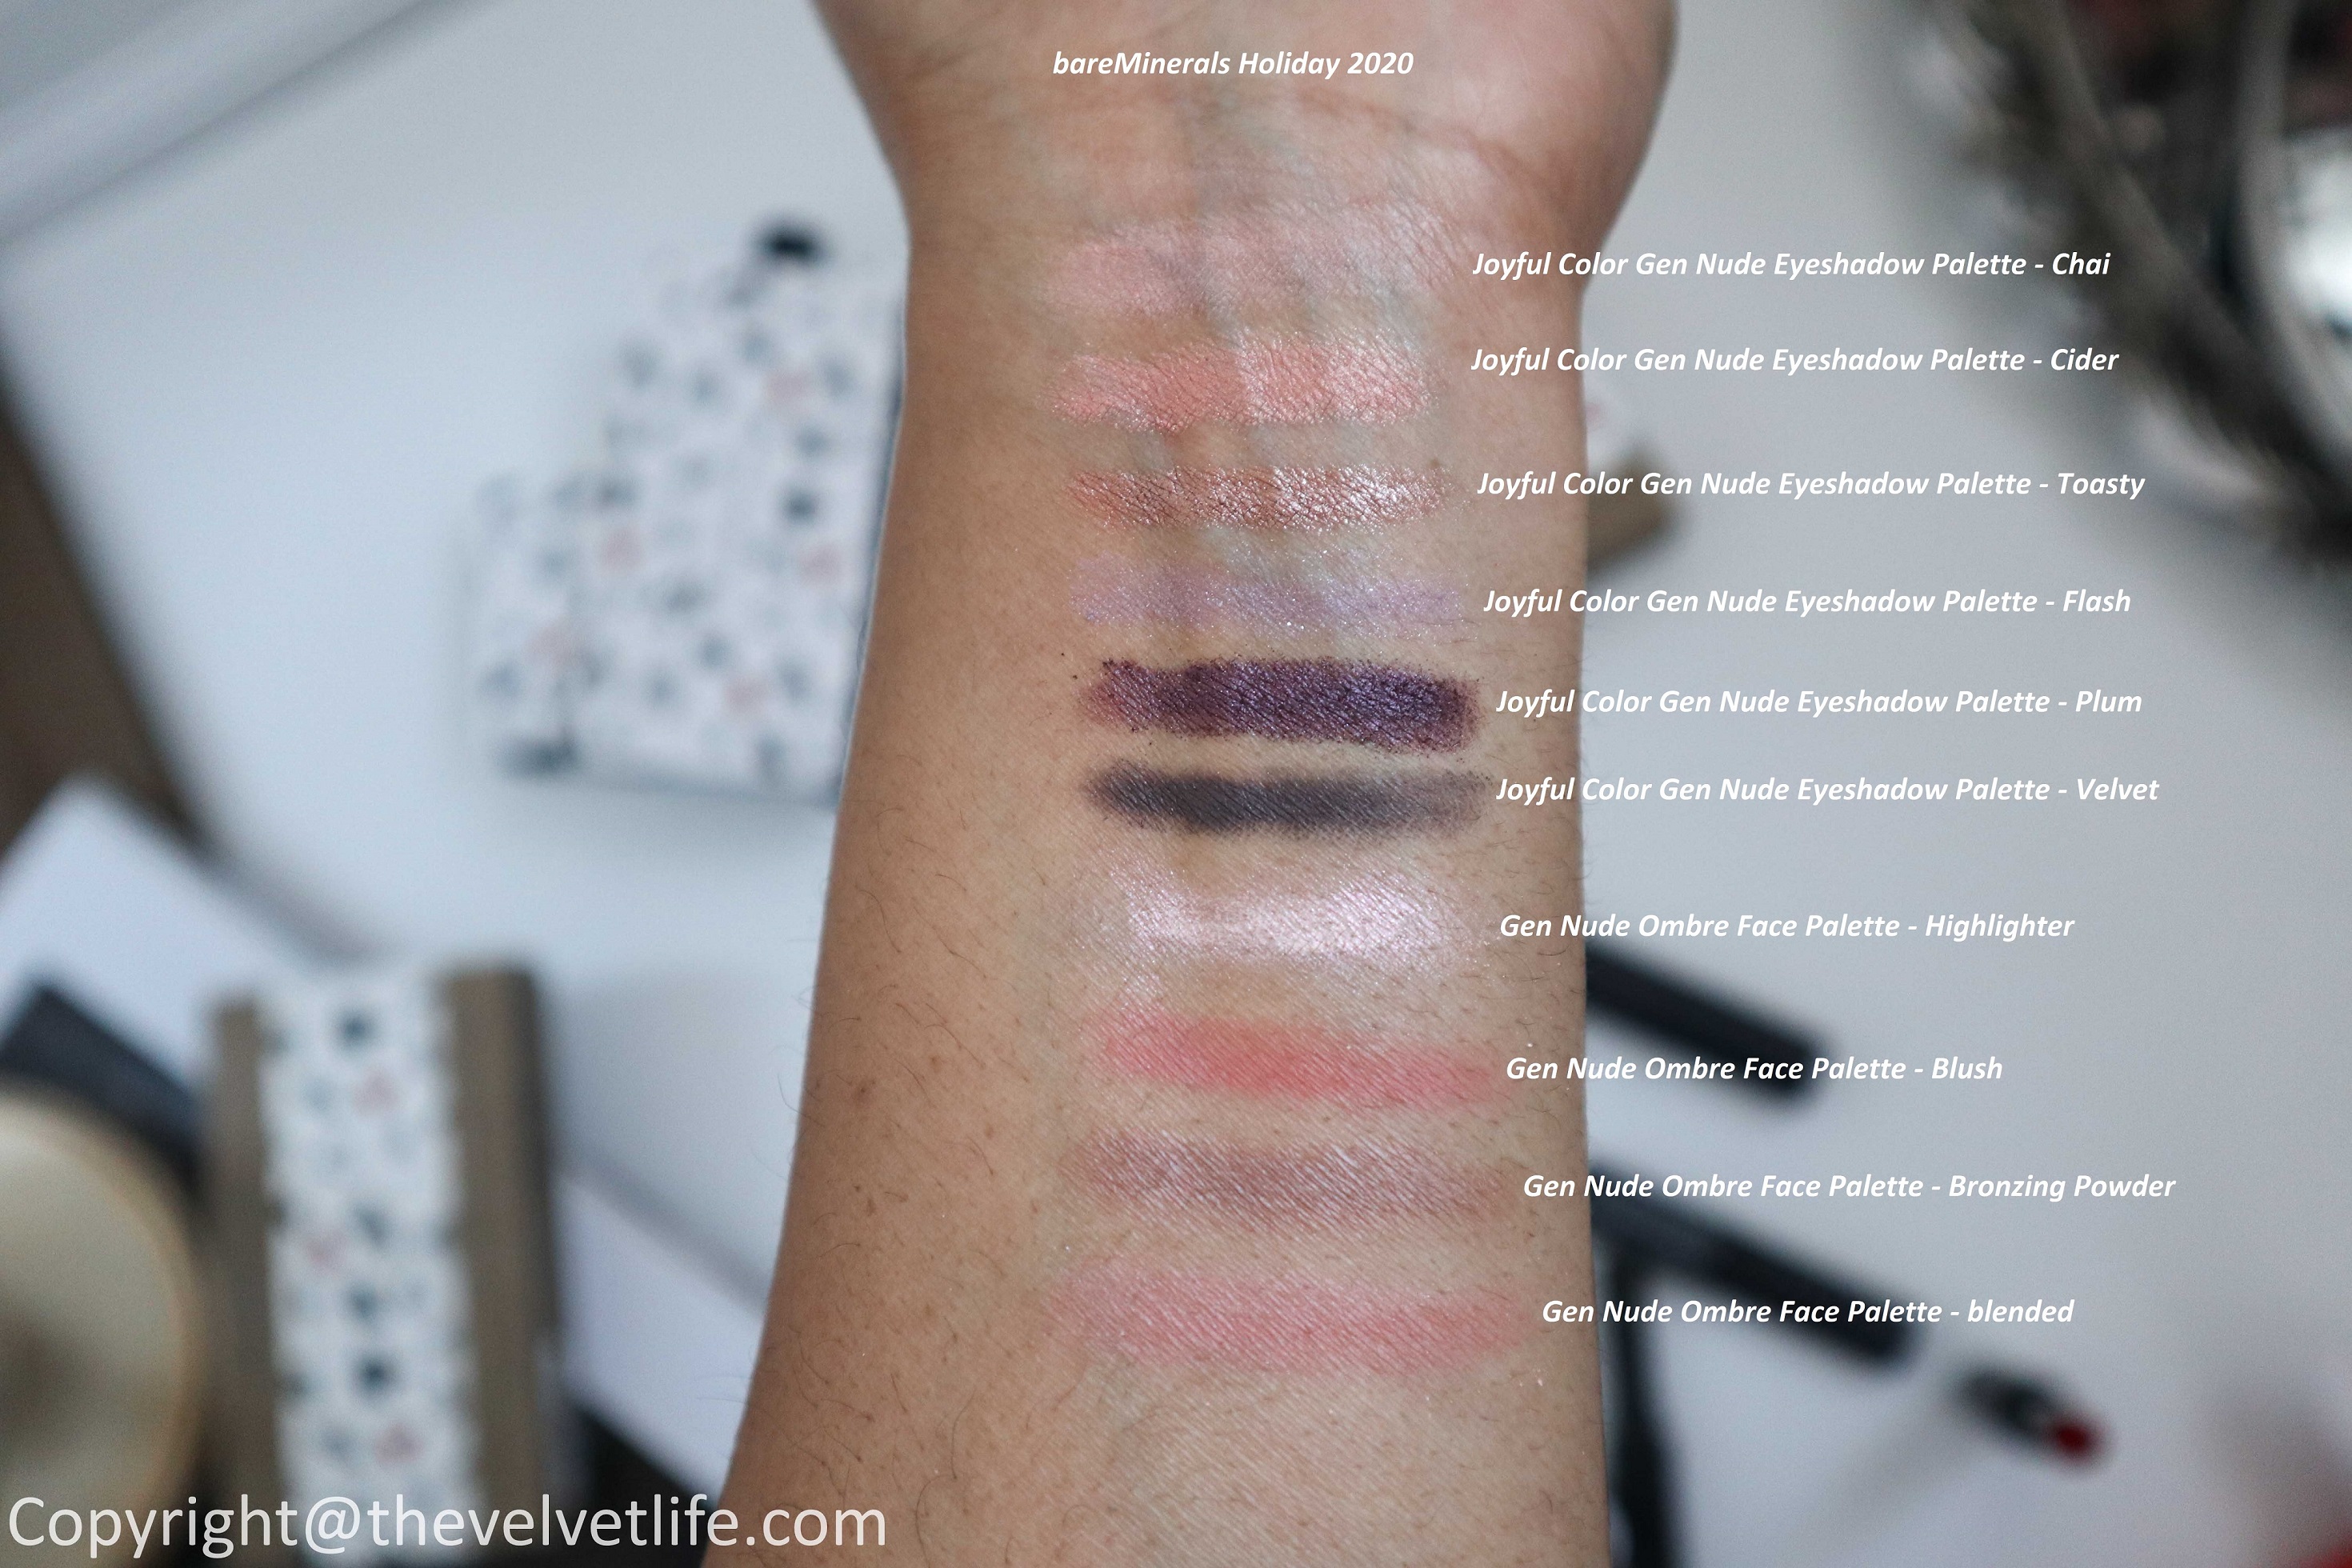 bareMineral Holiday 2020 collection review and swatches